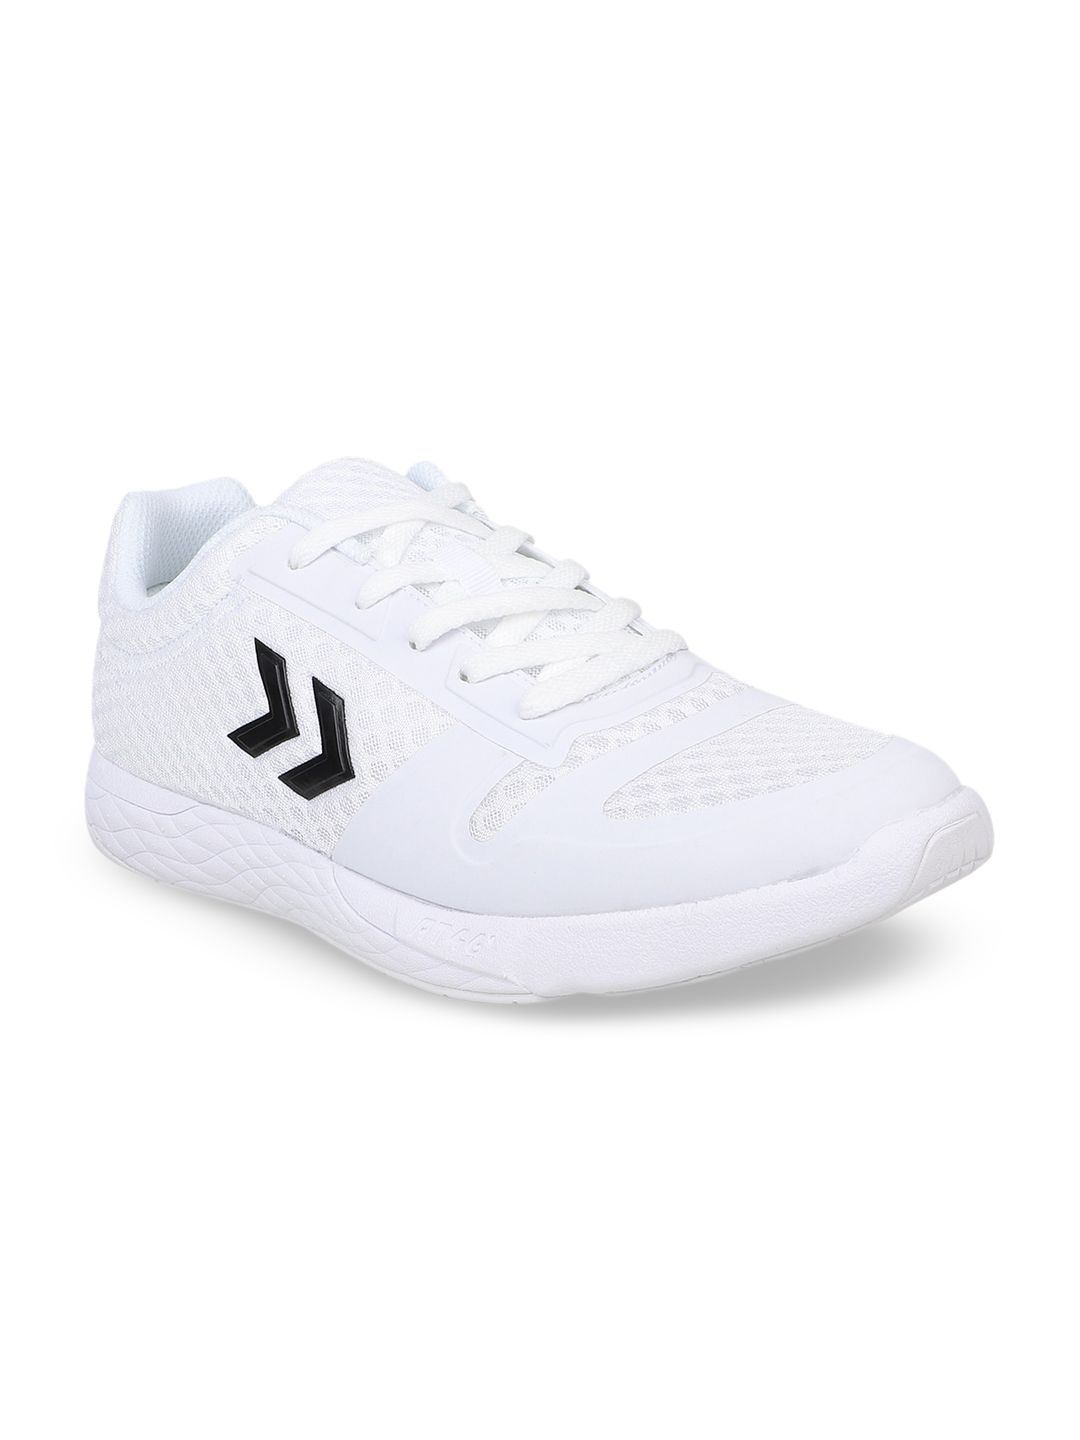 hummel Unisex White Mesh Training or Gym Shoes Price in India